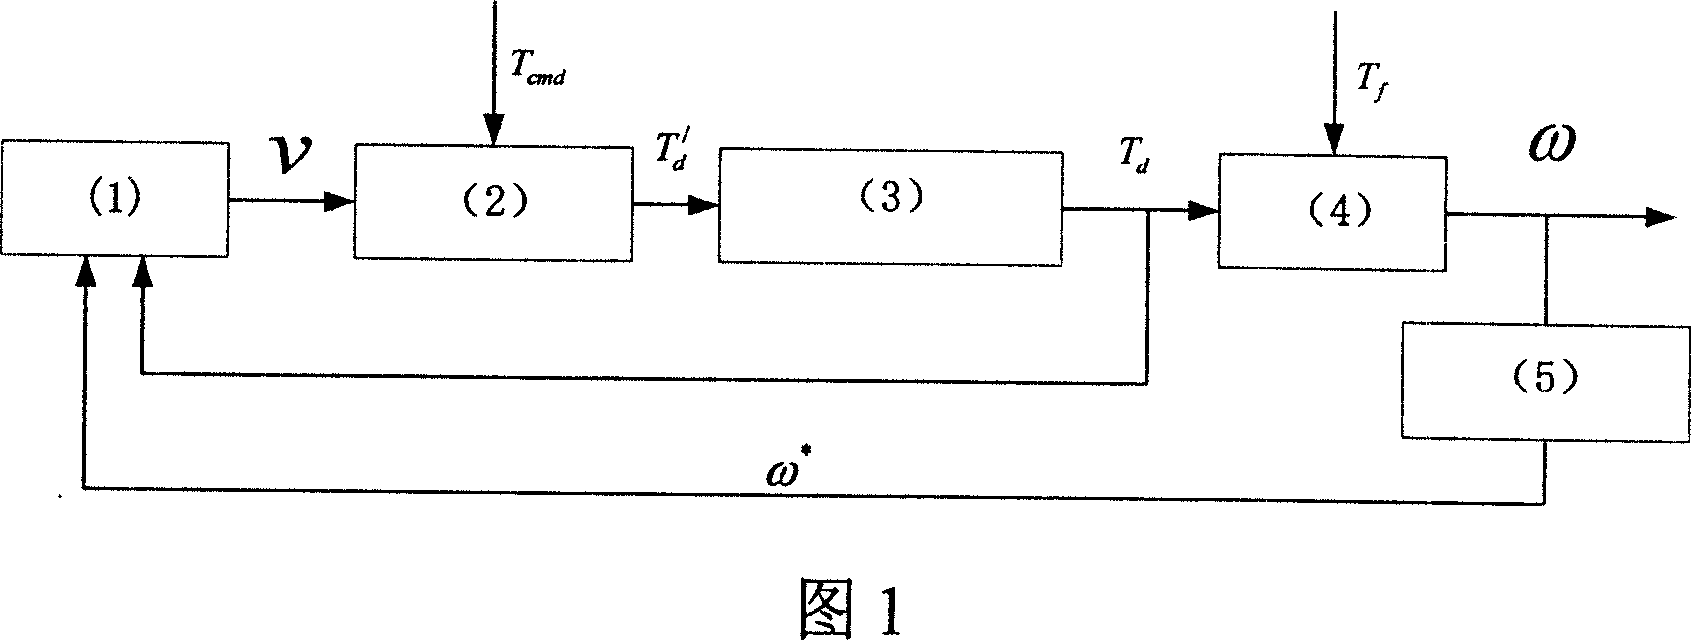 Four-wheel driving electric vehicle pavement adhesion factor identifying method